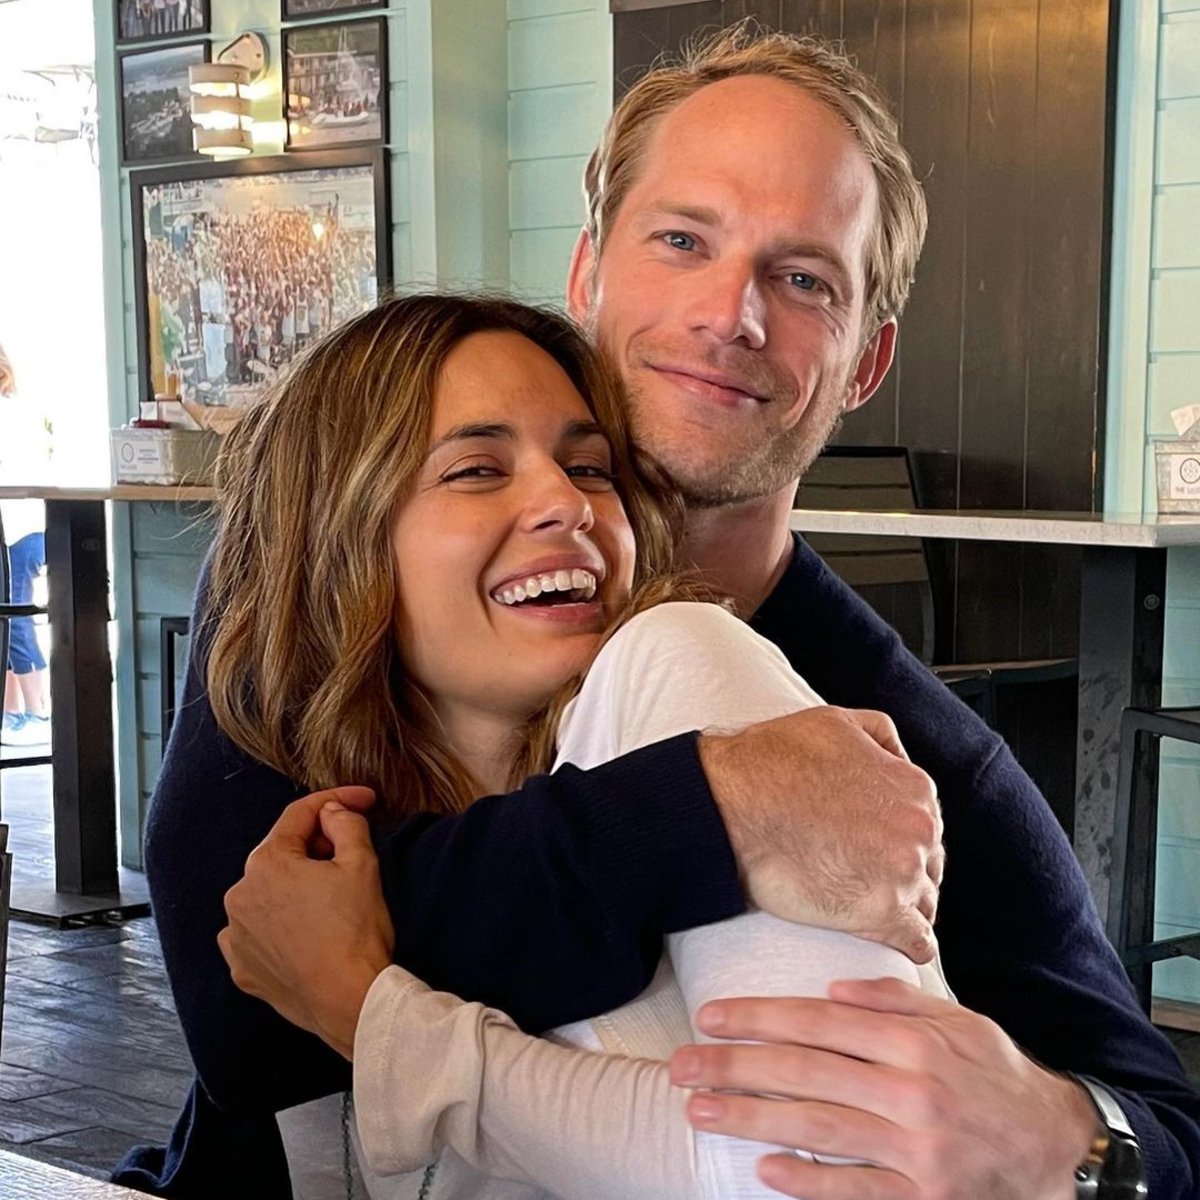 Pretty Little Liars’ Torrey DeVitto Is Engaged to Jared LaPine